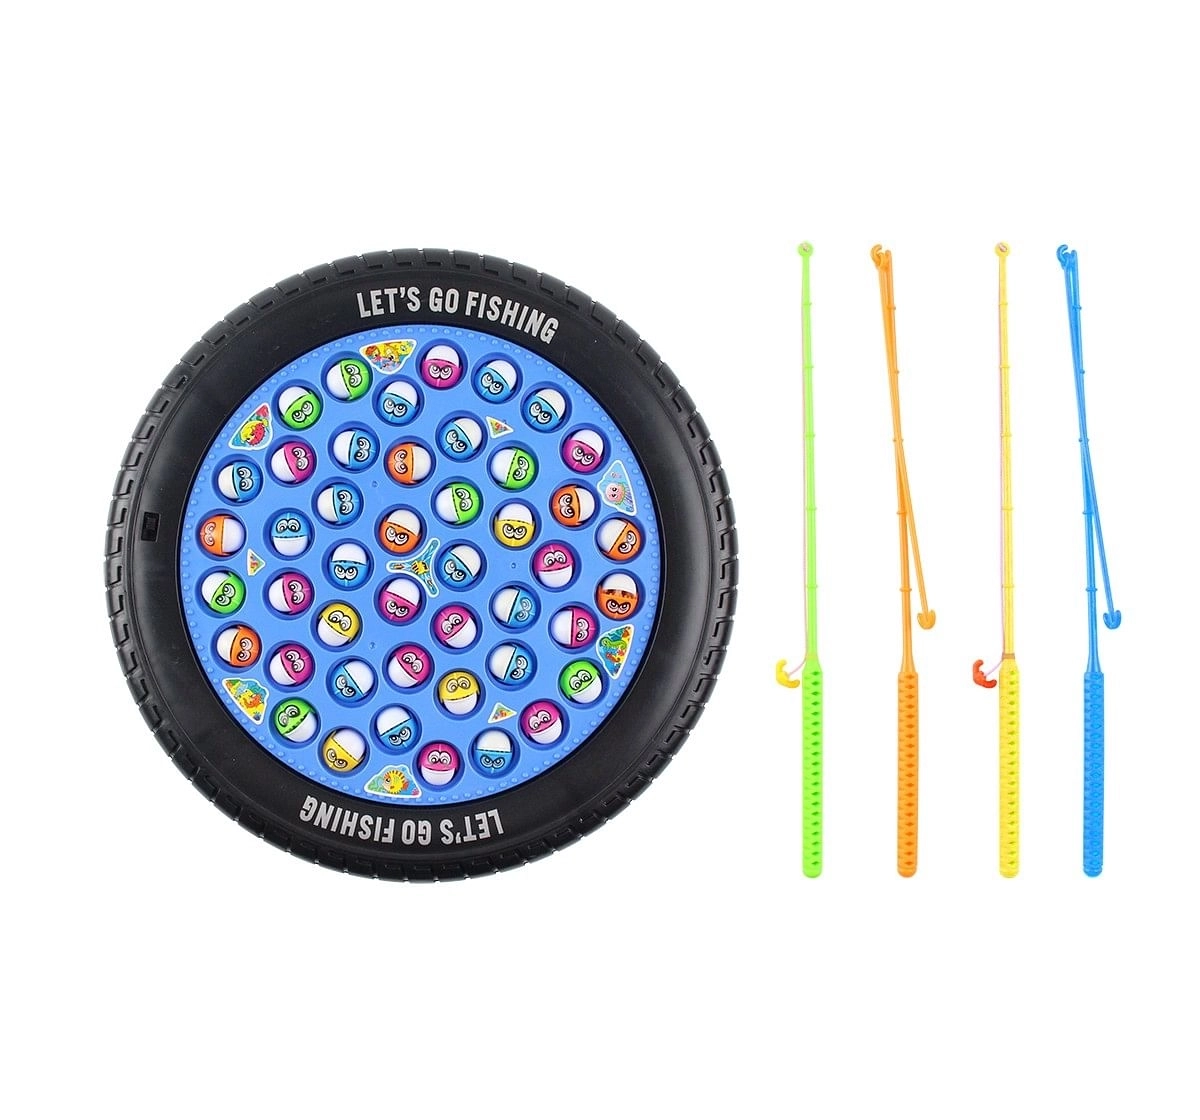 Youreka Fish It Out Fishing Game Small with 2 Fishing Rods & 21 Fish for Kids age 3Y+ 